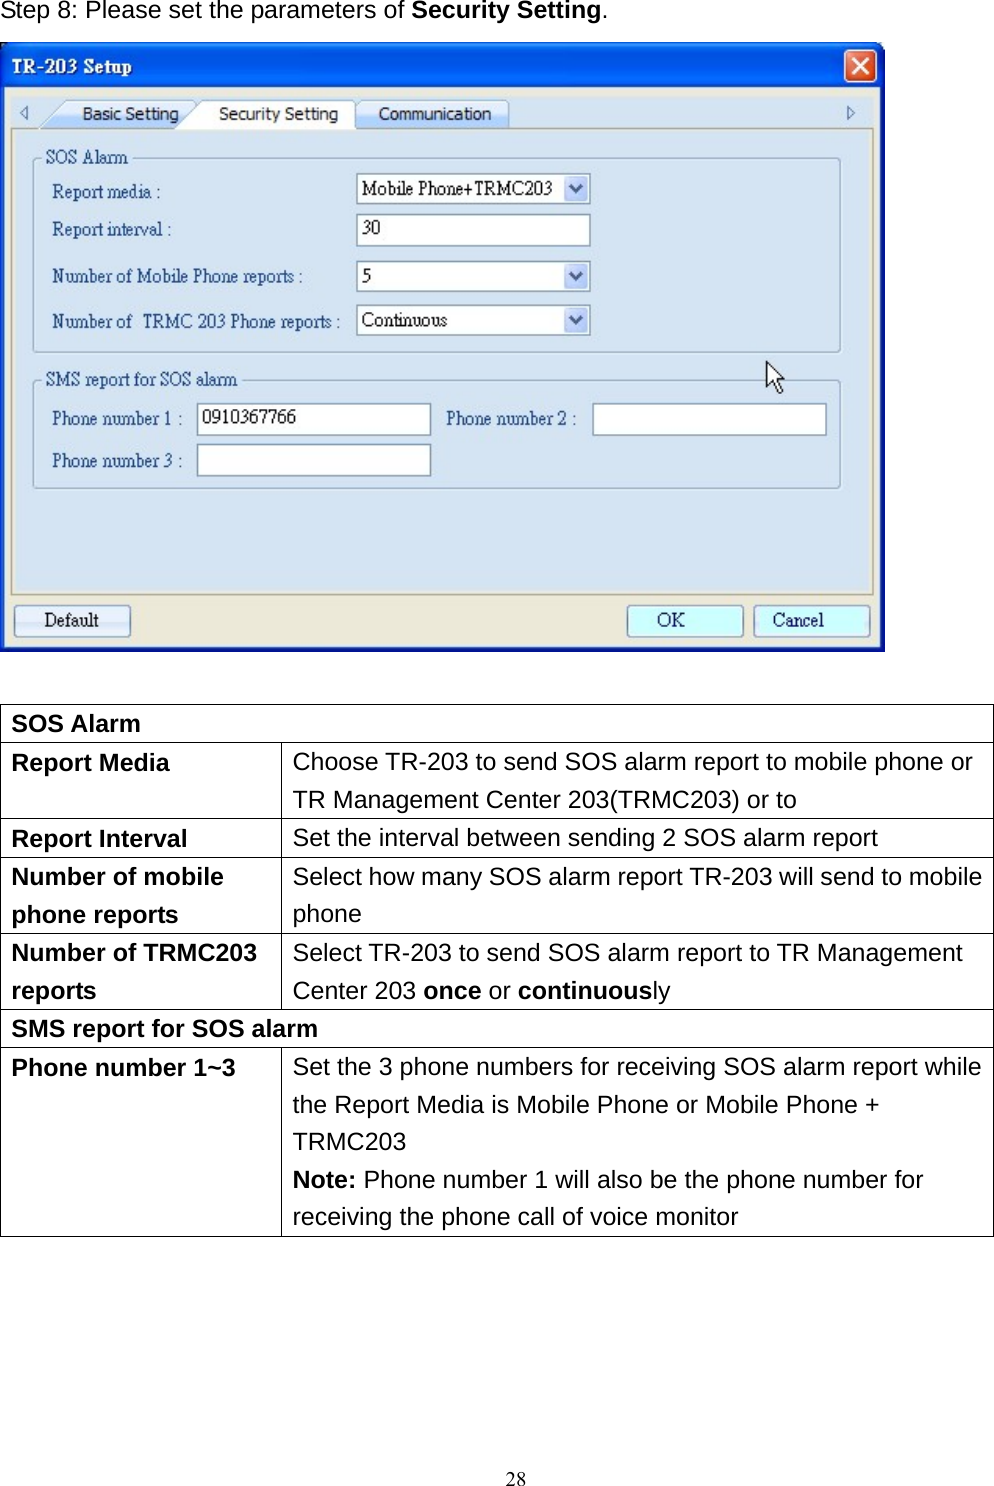 Step 8: Please set the parameters of Security Setting.   SOS Alarm Report Media  Choose TR-203 to send SOS alarm report to mobile phone or TR Management Center 203(TRMC203) or to   Report Interval  Set the interval between sending 2 SOS alarm report Number of mobile phone reports Select how many SOS alarm report TR-203 will send to mobile phone Number of TRMC203 reports Select TR-203 to send SOS alarm report to TR Management Center 203 once or continuously SMS report for SOS alarm Phone number 1~3  Set the 3 phone numbers for receiving SOS alarm report while the Report Media is Mobile Phone or Mobile Phone + TRMC203 Note: Phone number 1 will also be the phone number for receiving the phone call of voice monitor       28